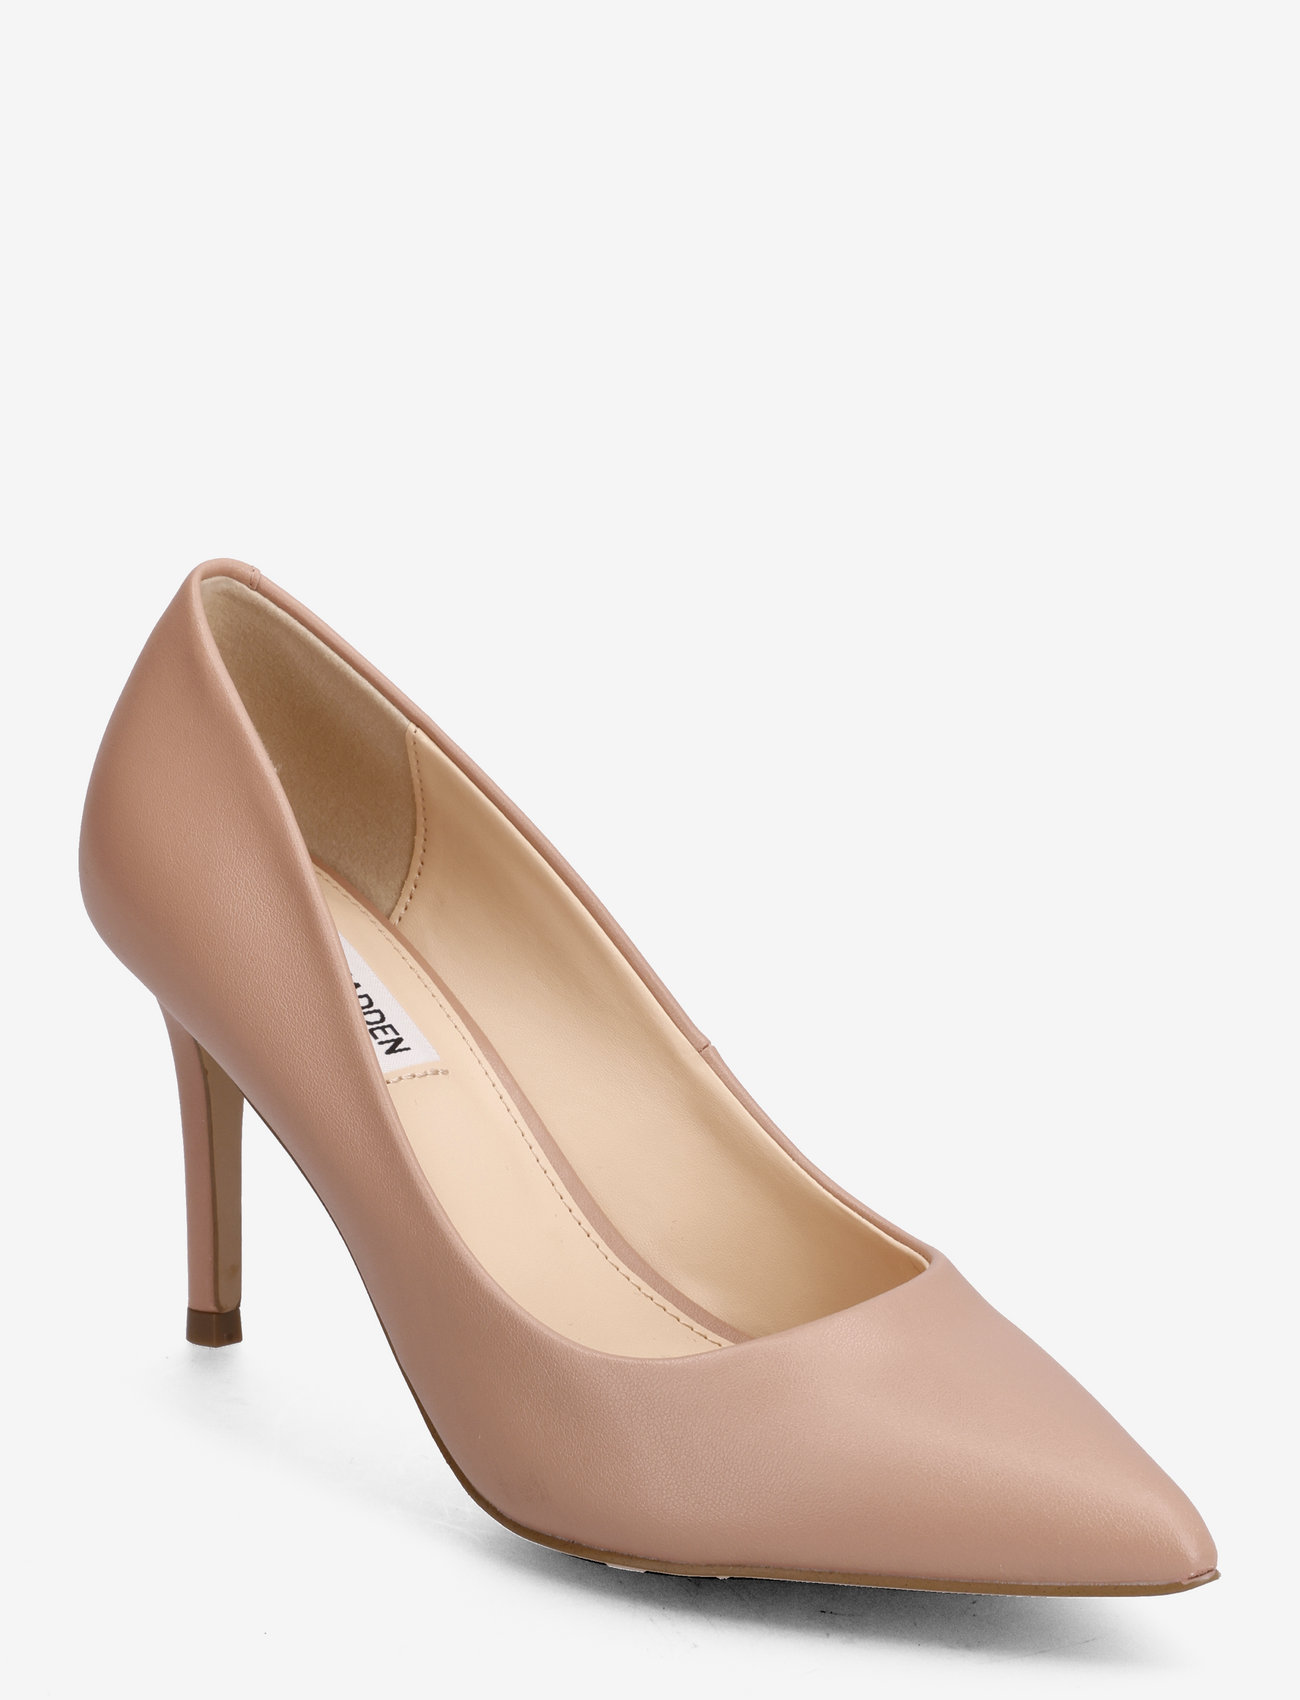 Steve Madden - Ladybug Pump - party wear at outlet prices - blush leather - 0